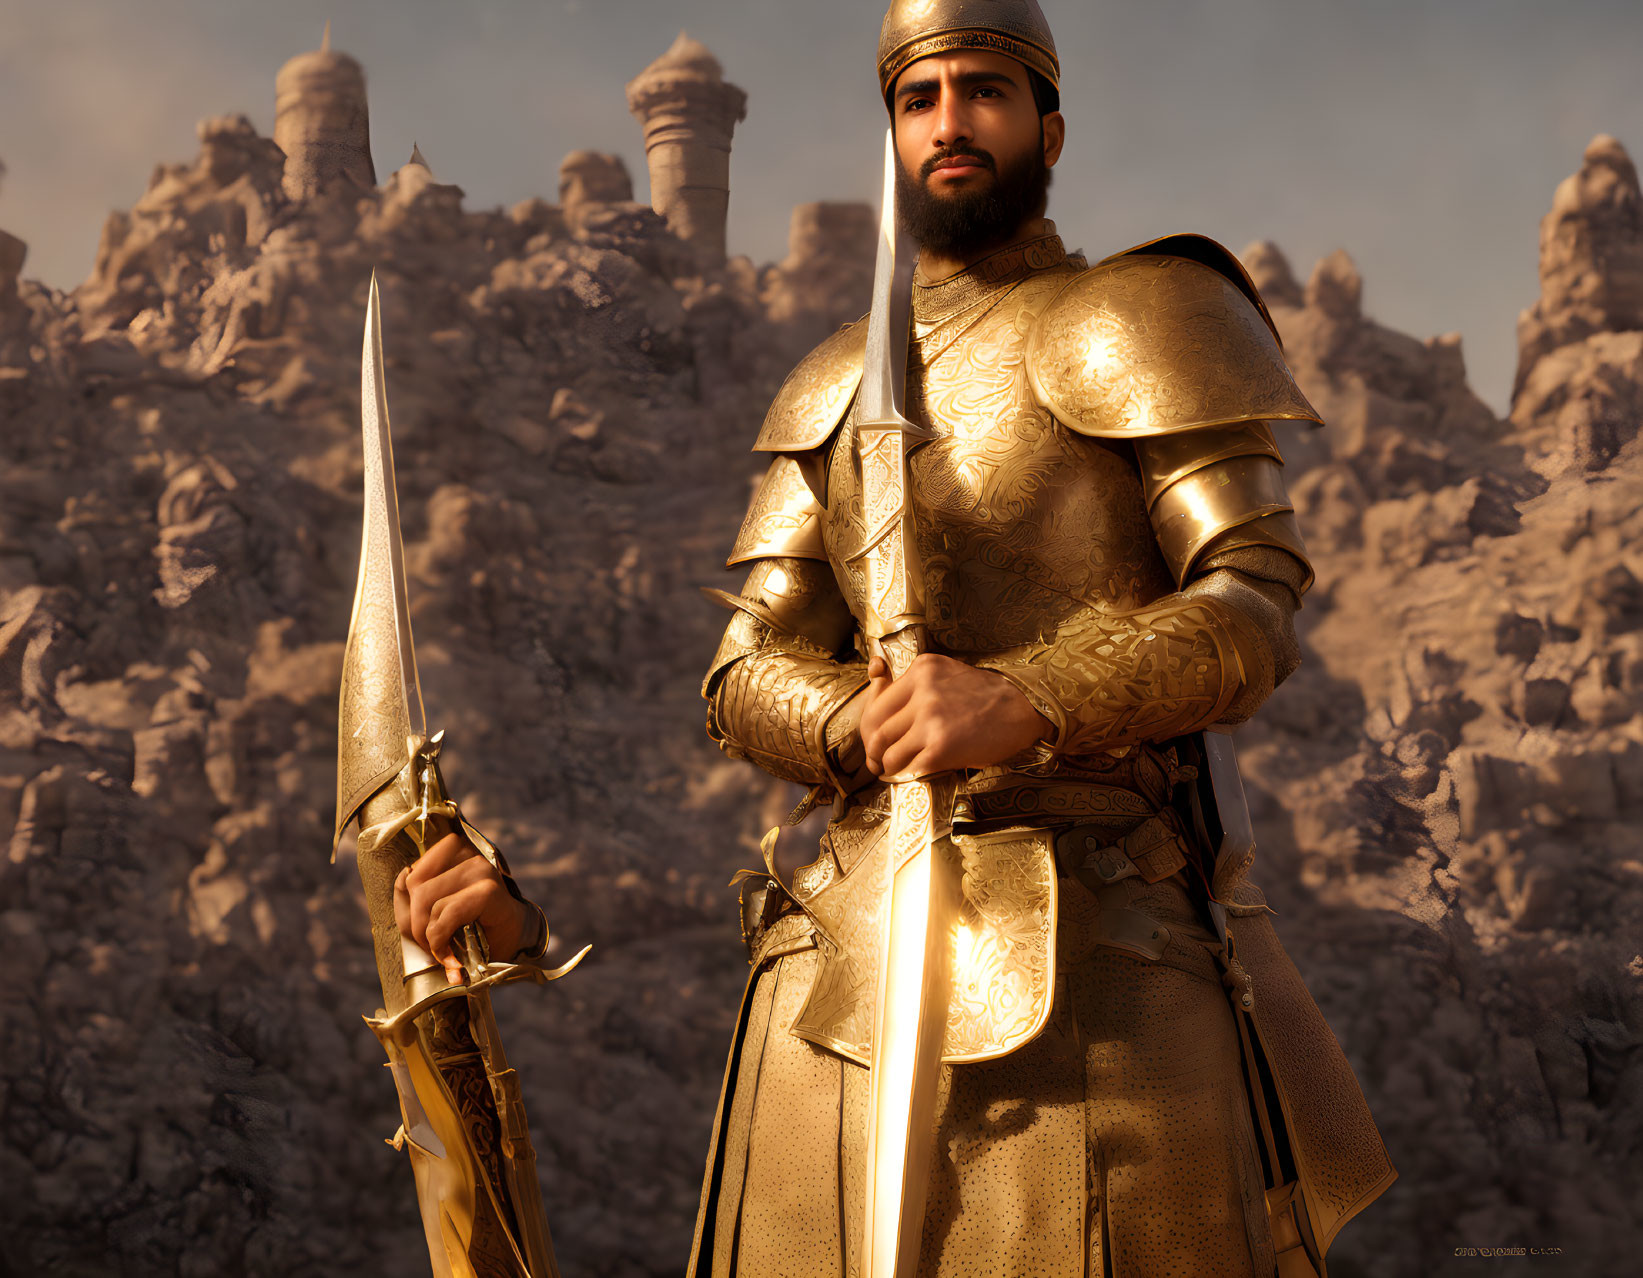 Knight in Golden Armor with Spear Against Mountain Backdrop